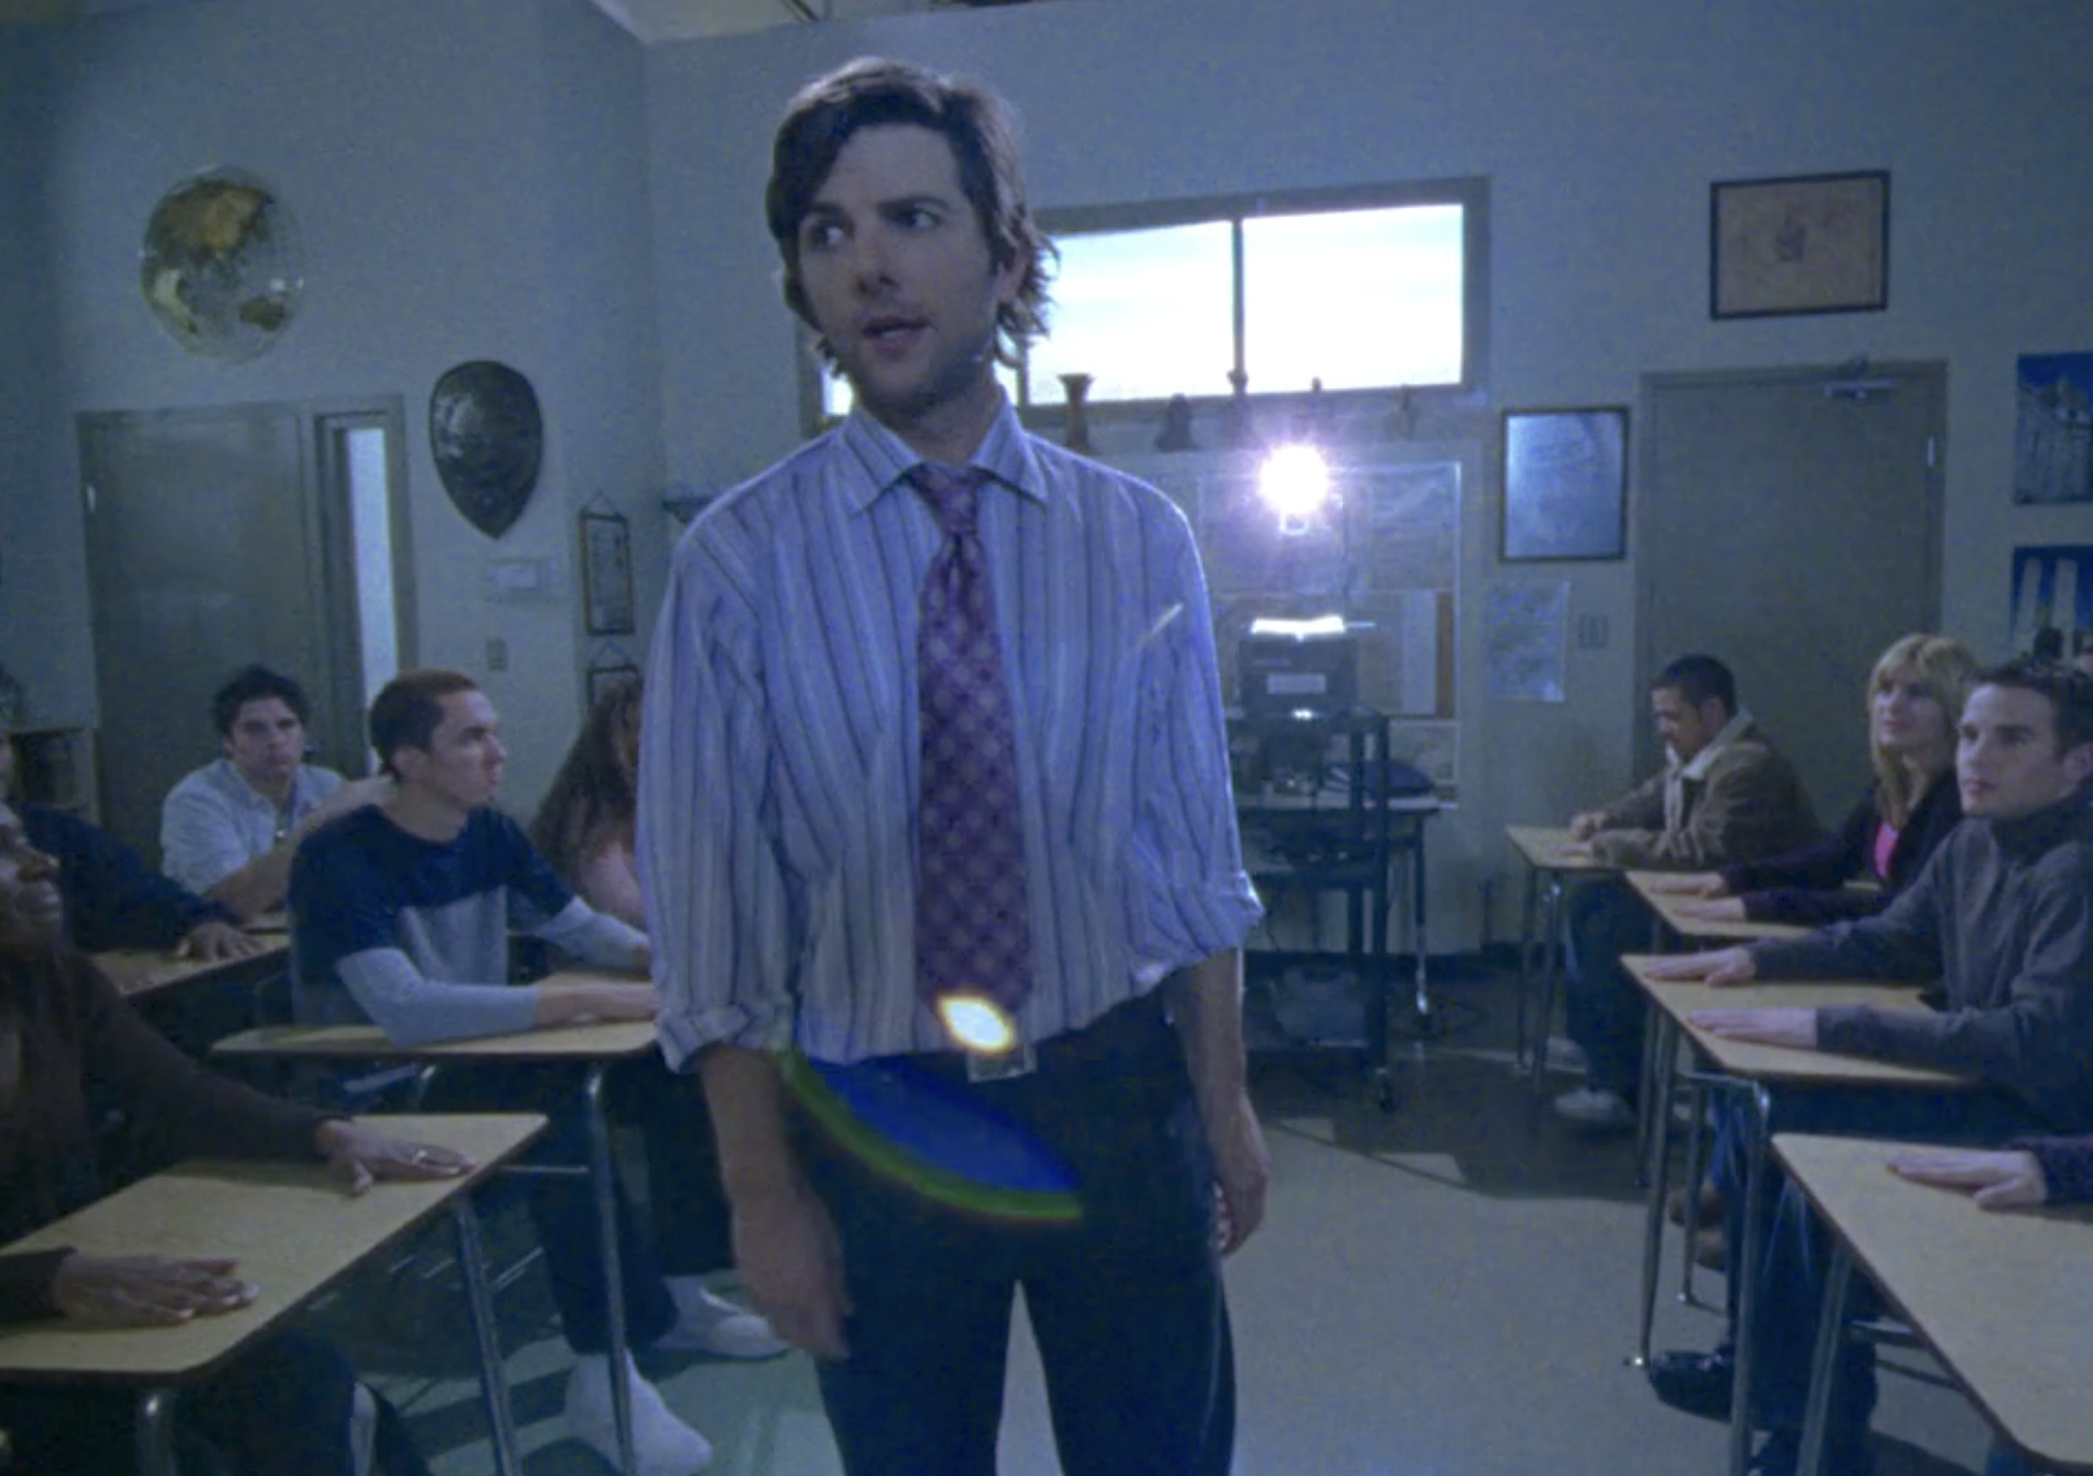 Screenshot from S1E14 of Veronica Mars. Adam Scott in a baggy button down shirt, tie, and baggy jeans with floppy hair is standing at the front of a classroom full of students.